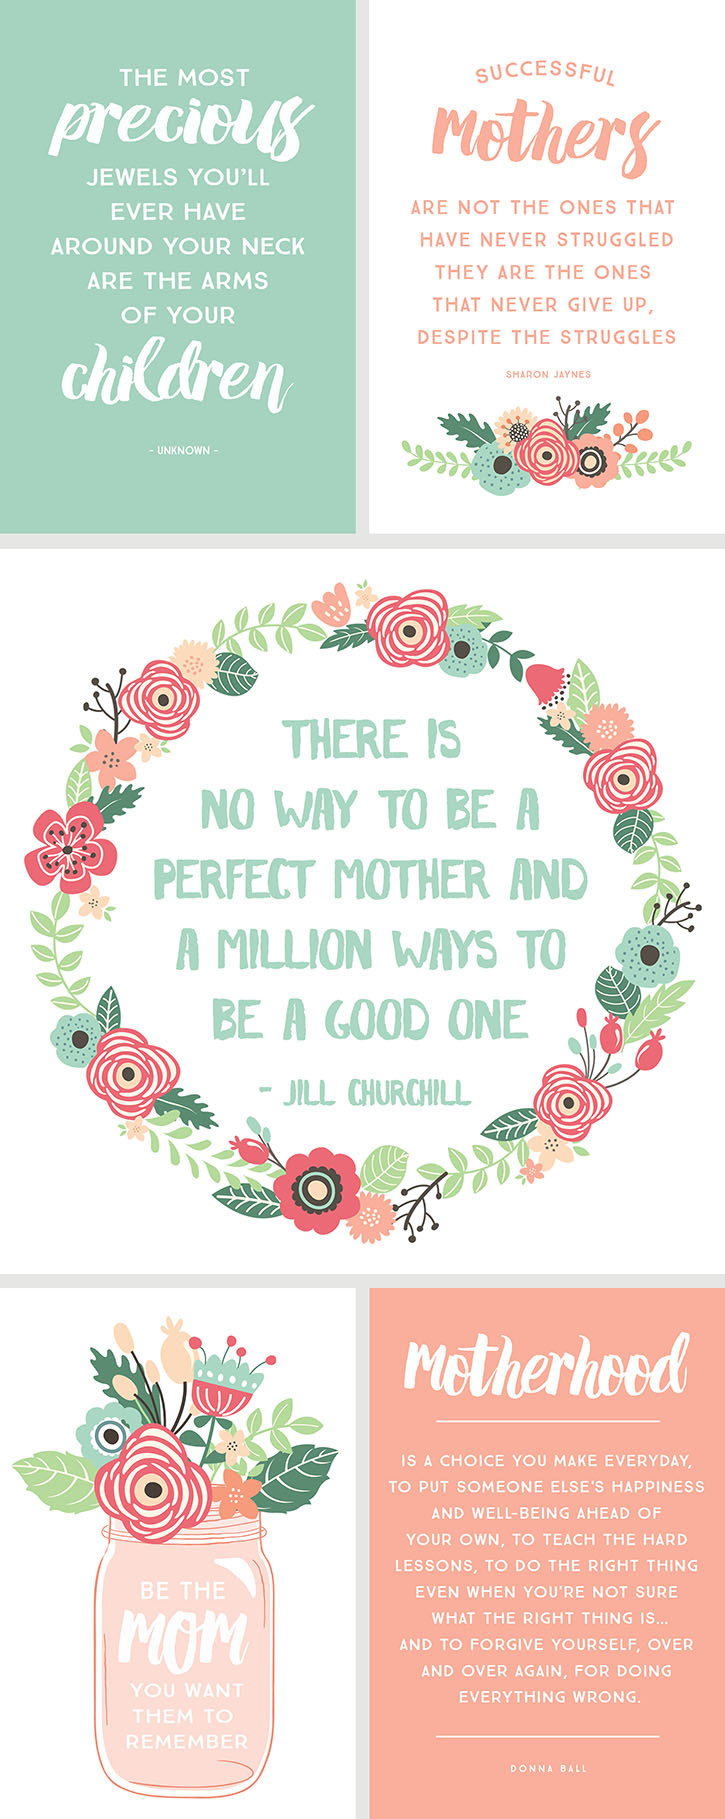 Motivational Quotes For Moms
 5 Inspirational Quotes for Mother s Day